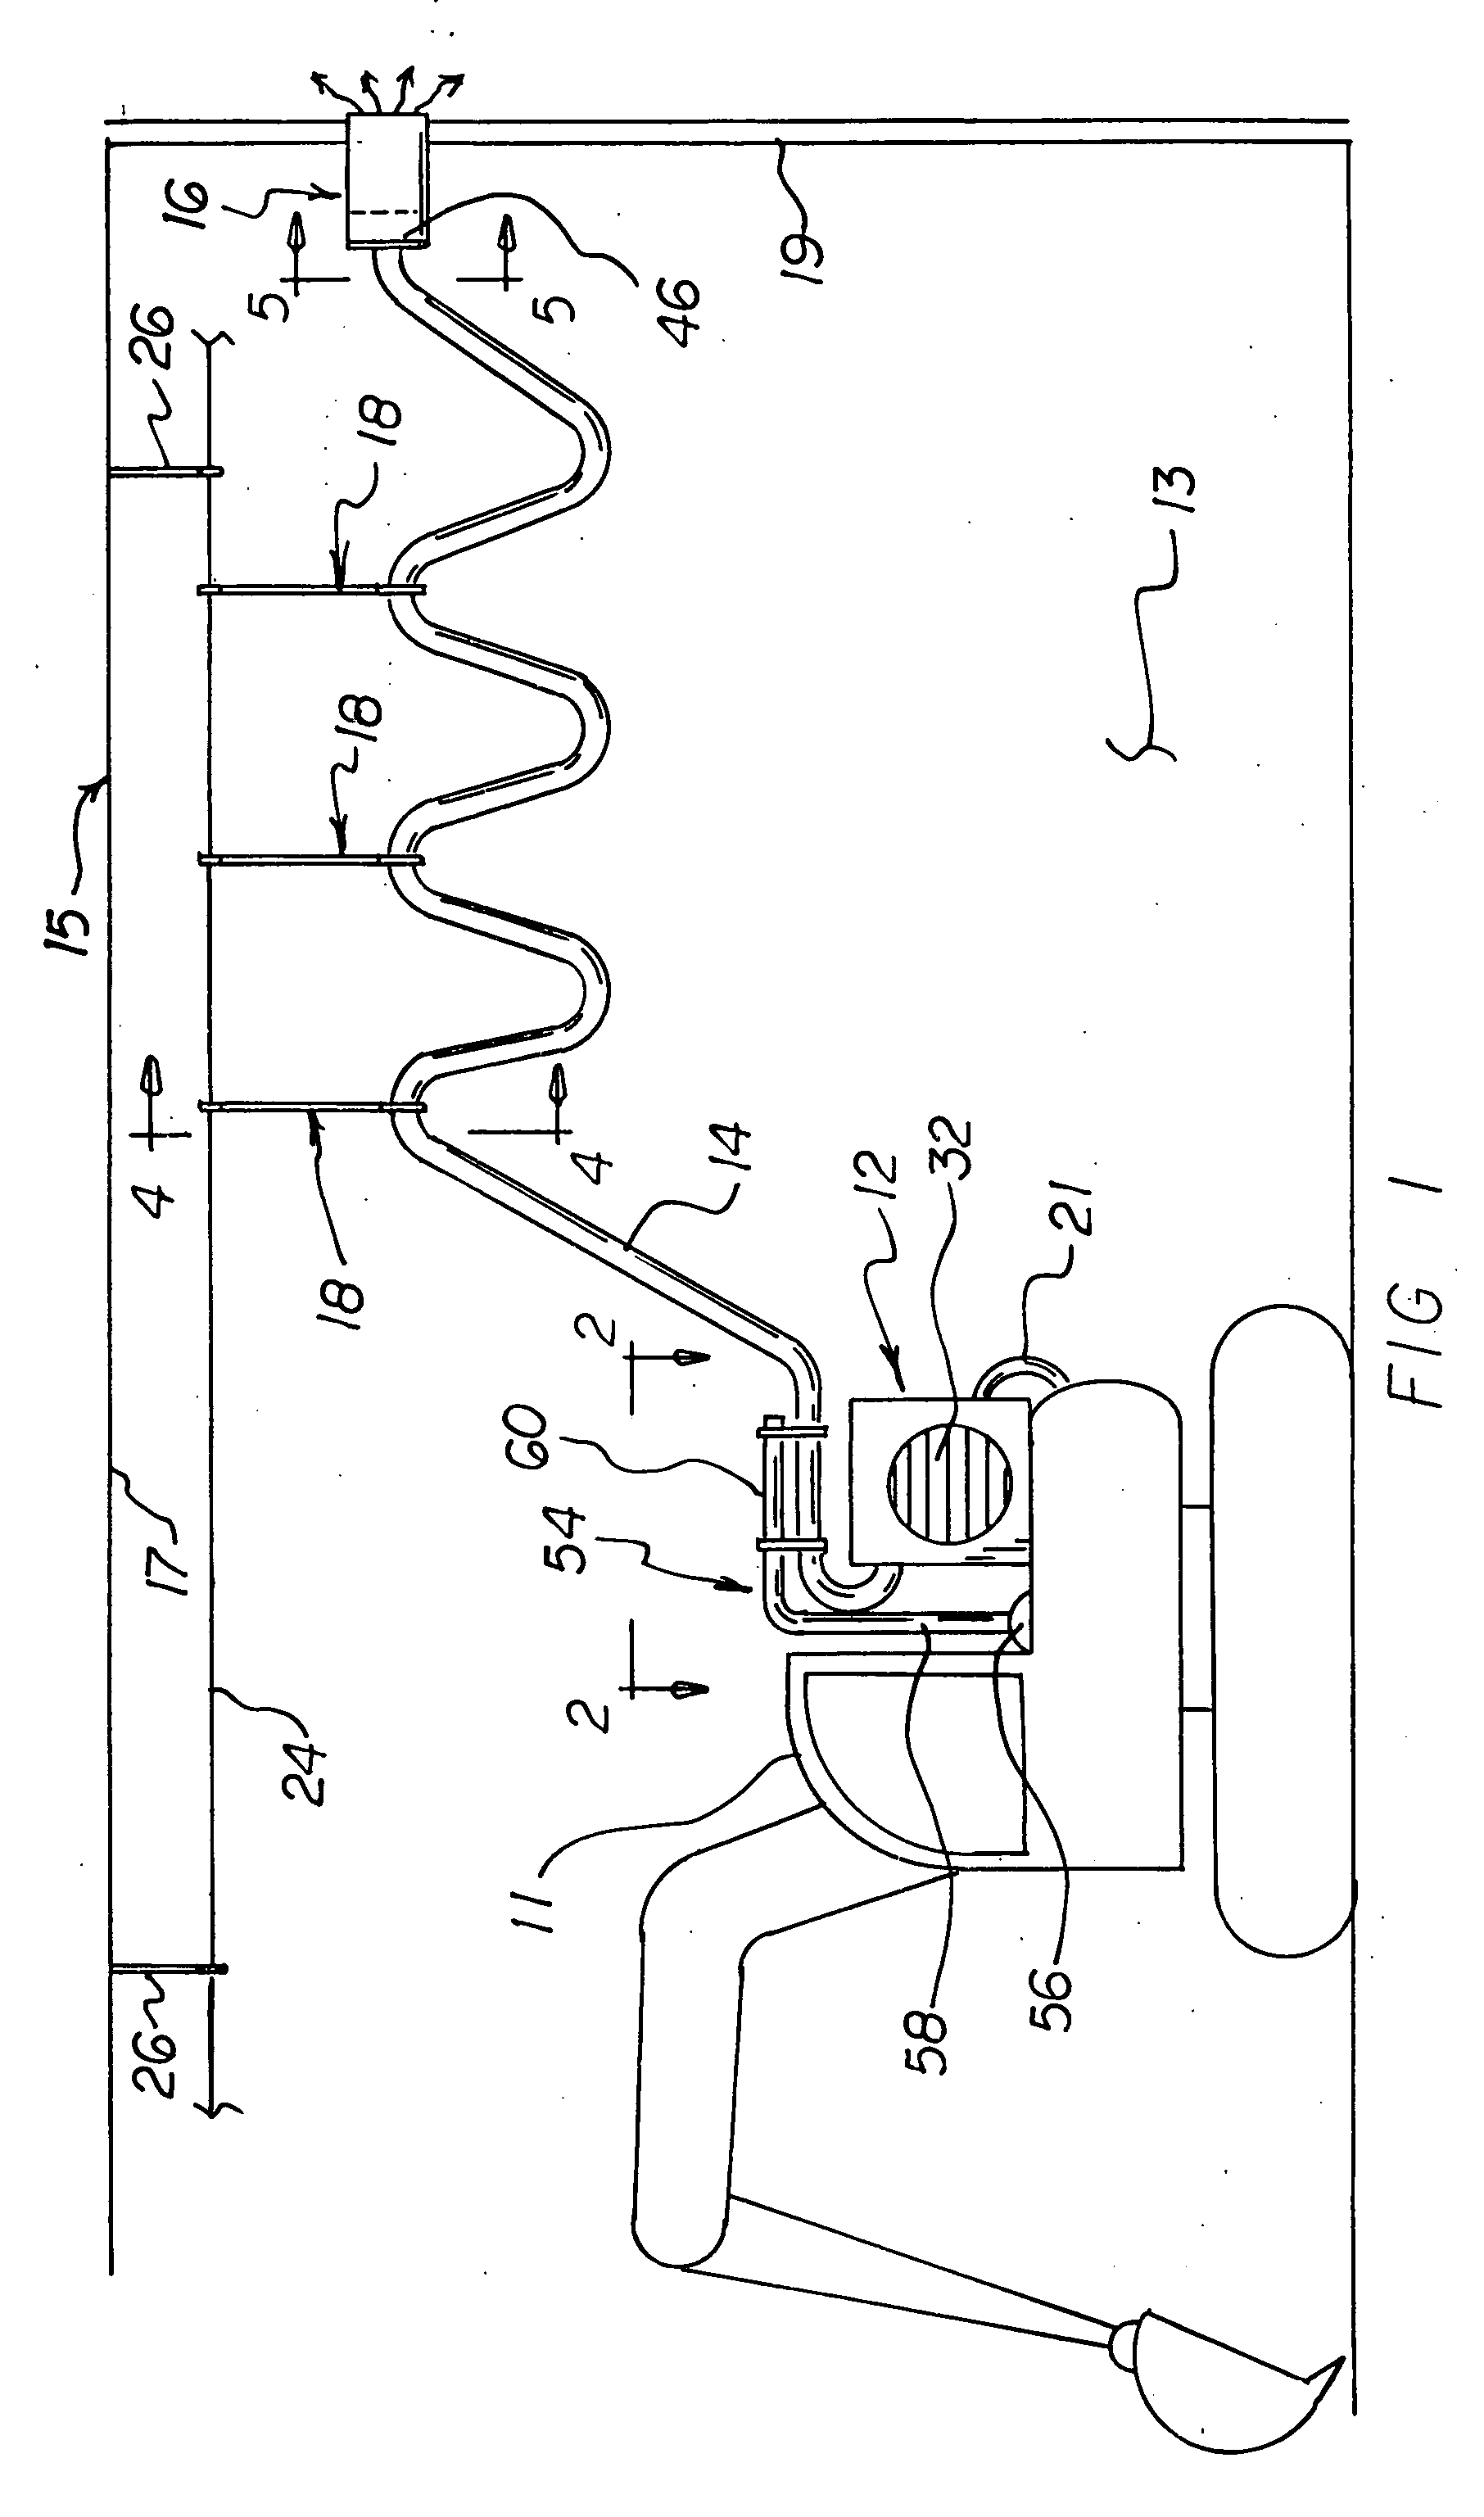 Internal combustion engine exhaust cooling and removal apparatus